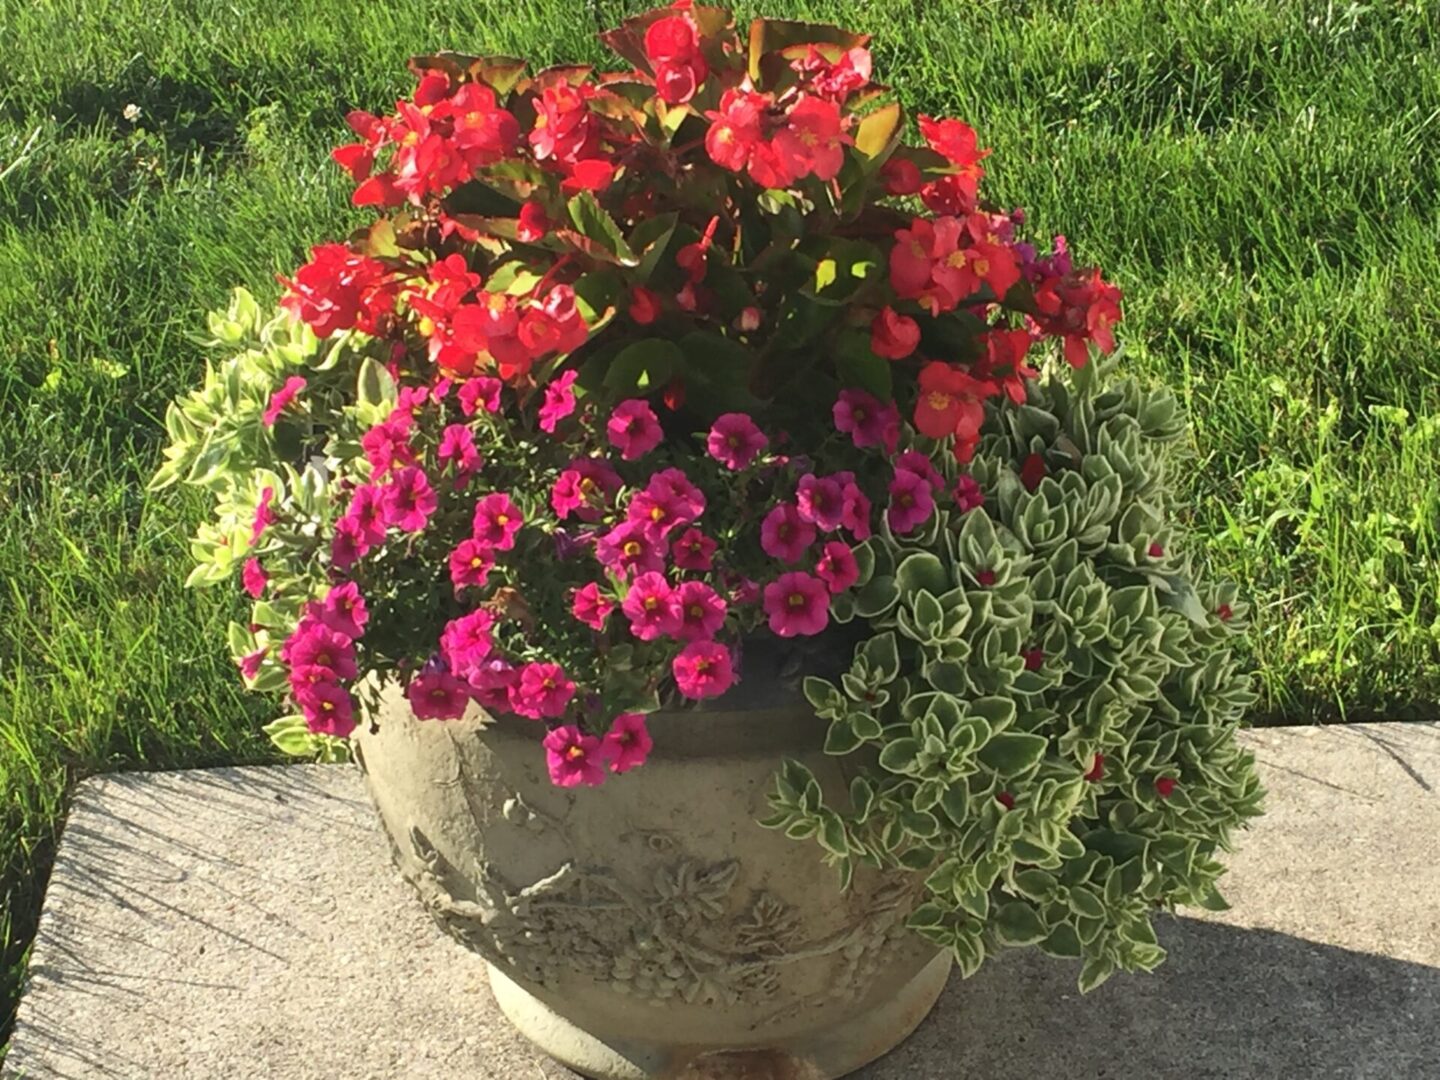 A flower pot with many flowers in it